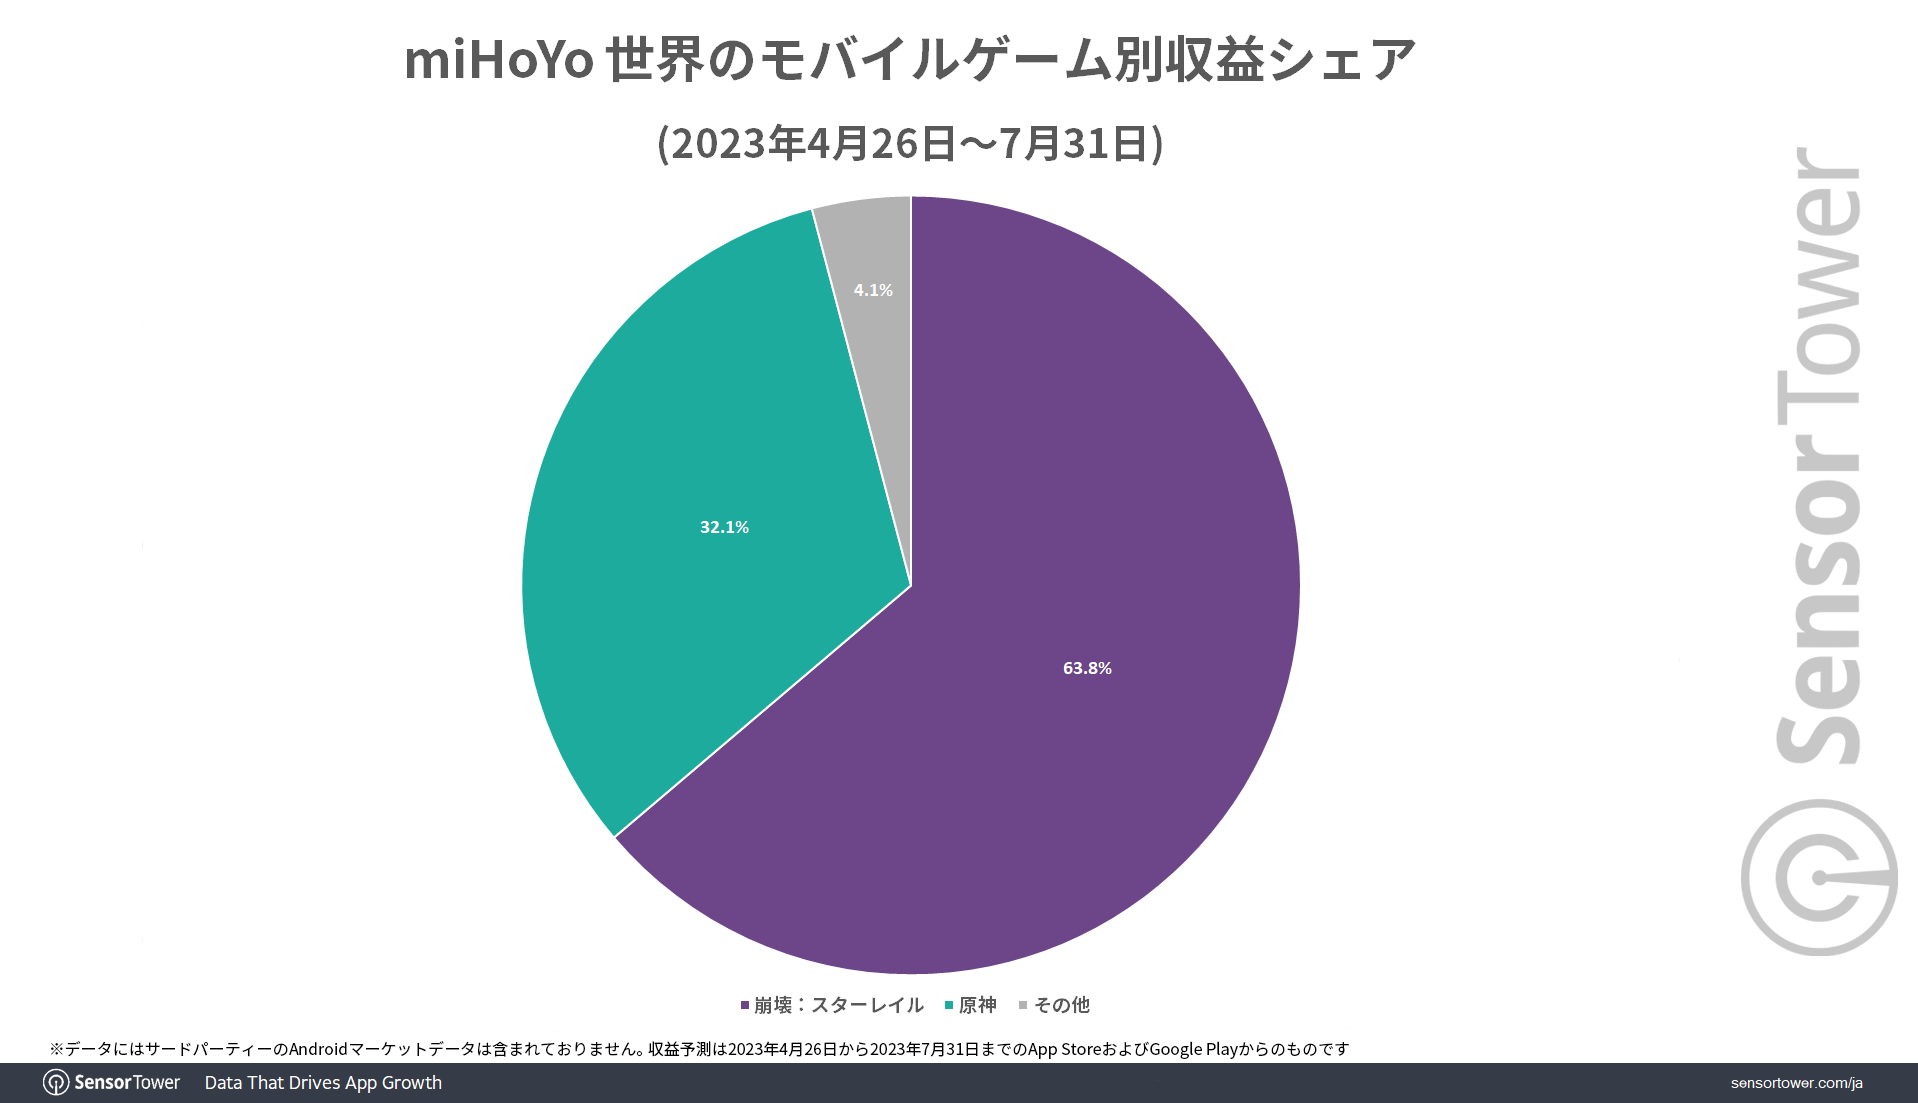 miHoYo-Revenue-Share-by-Game2